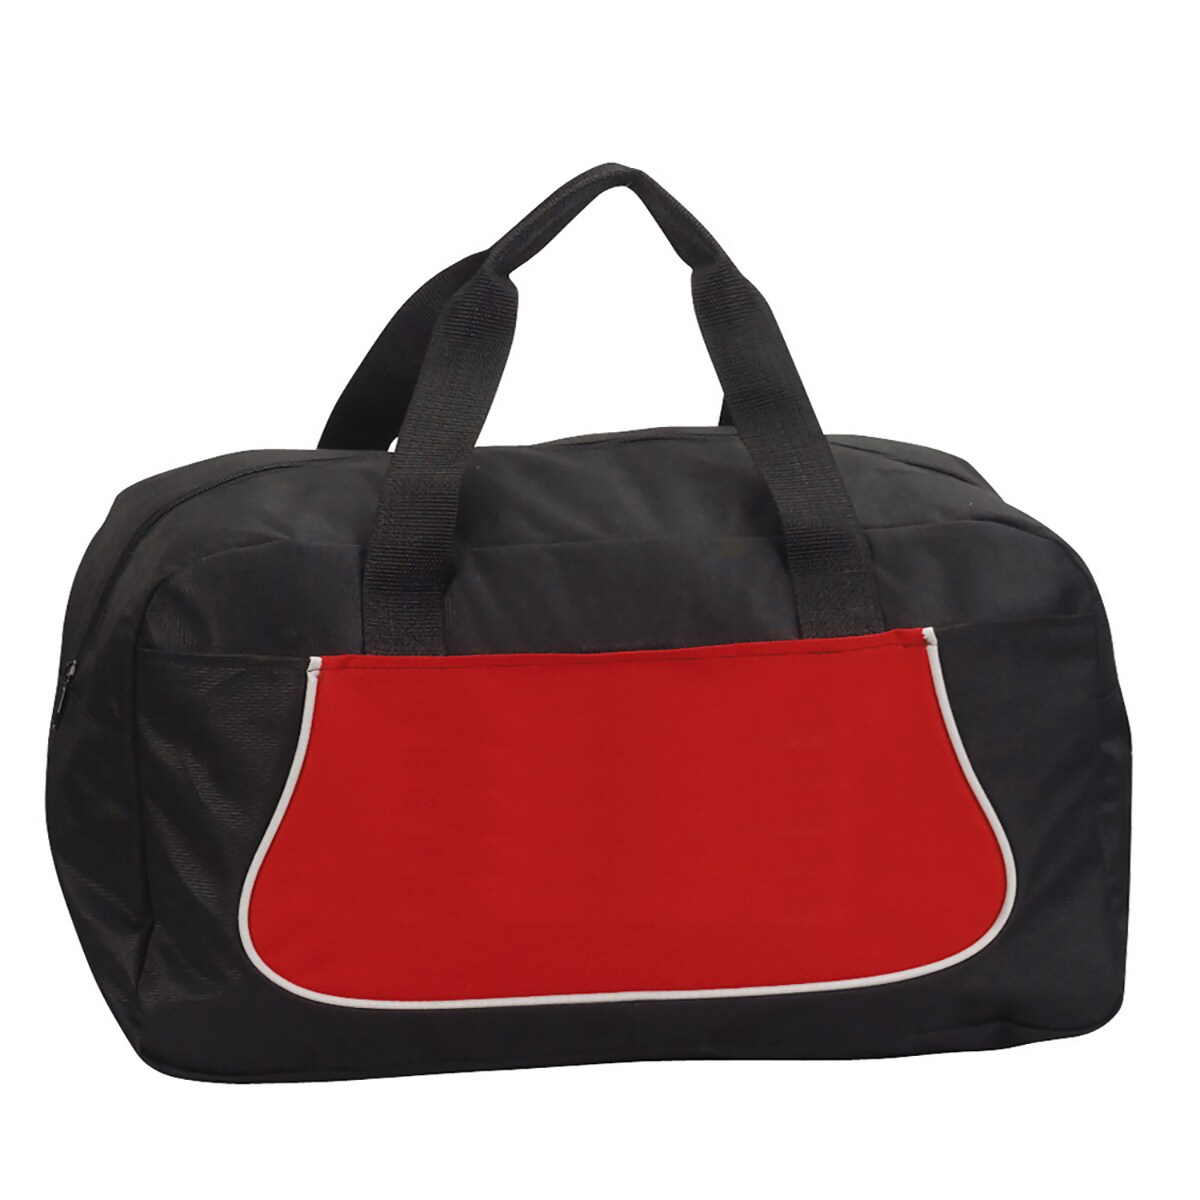 Goodhope  Recycollection 18-inch Duffel Bag Red - image 1 of 3